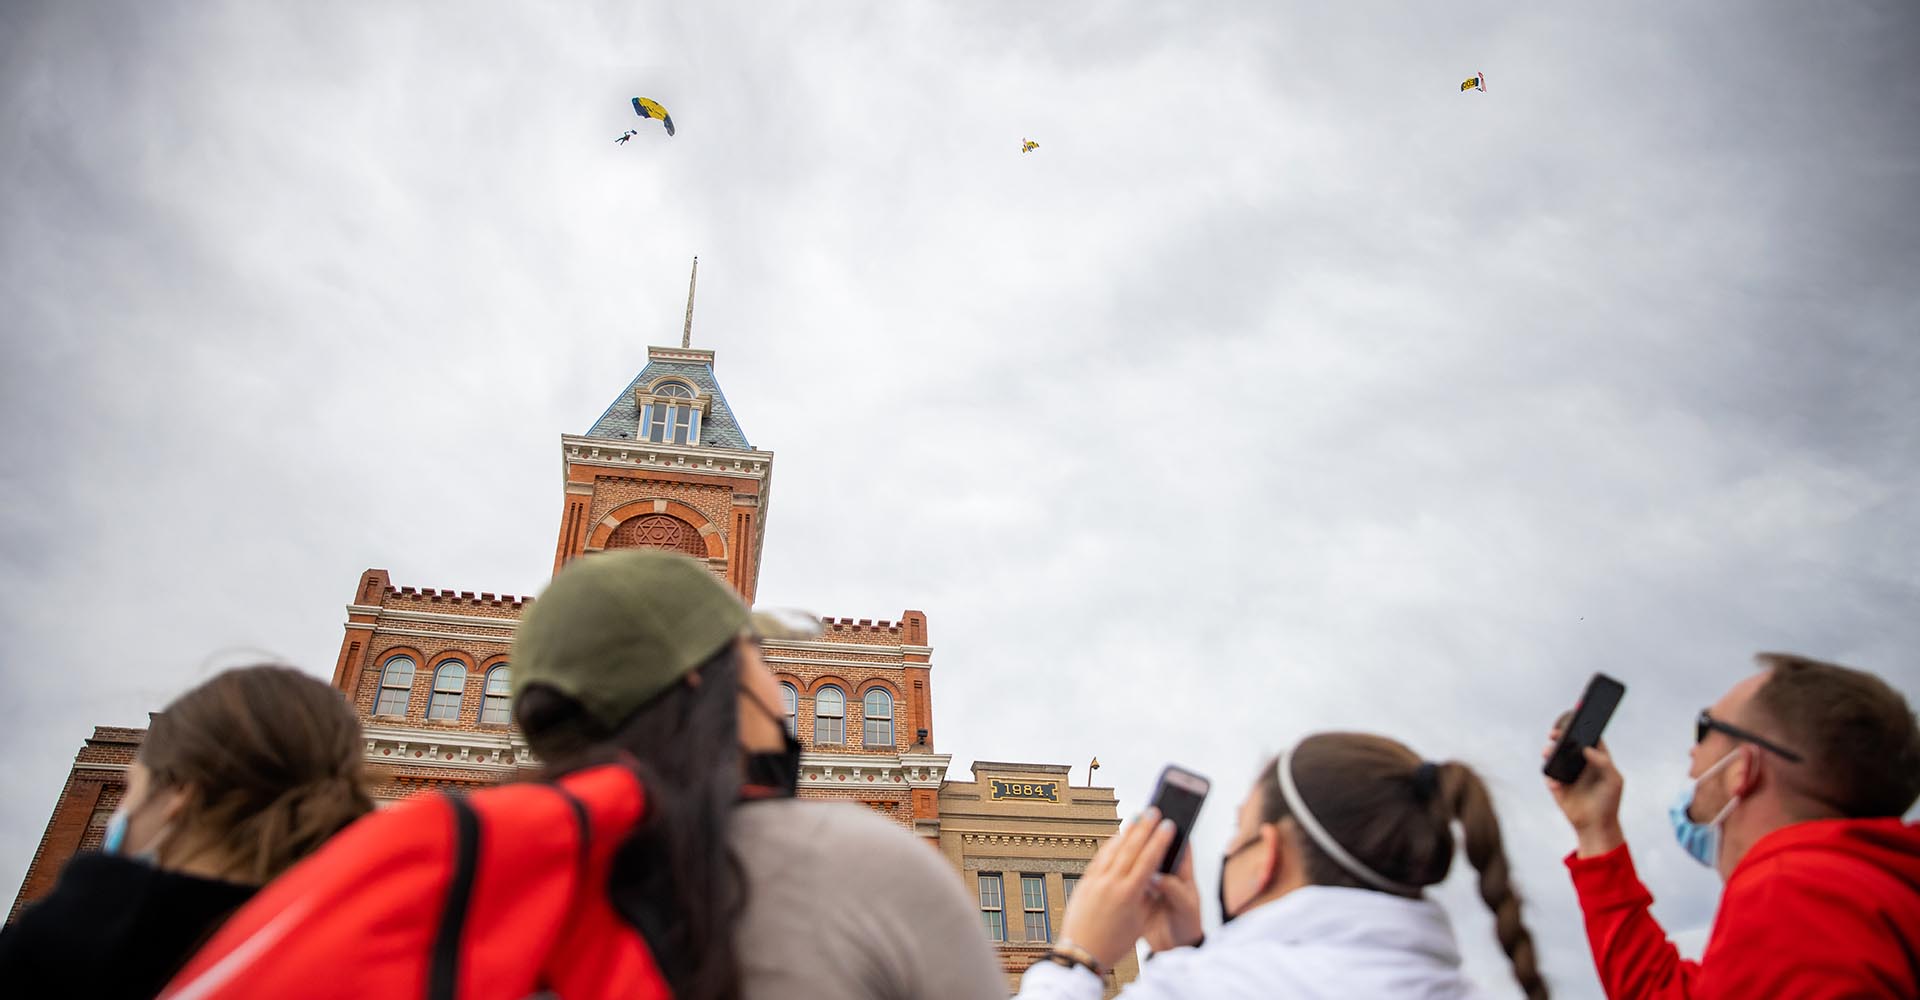 U.S. Navy Leap Frogs drop in on Auraria to honor vets